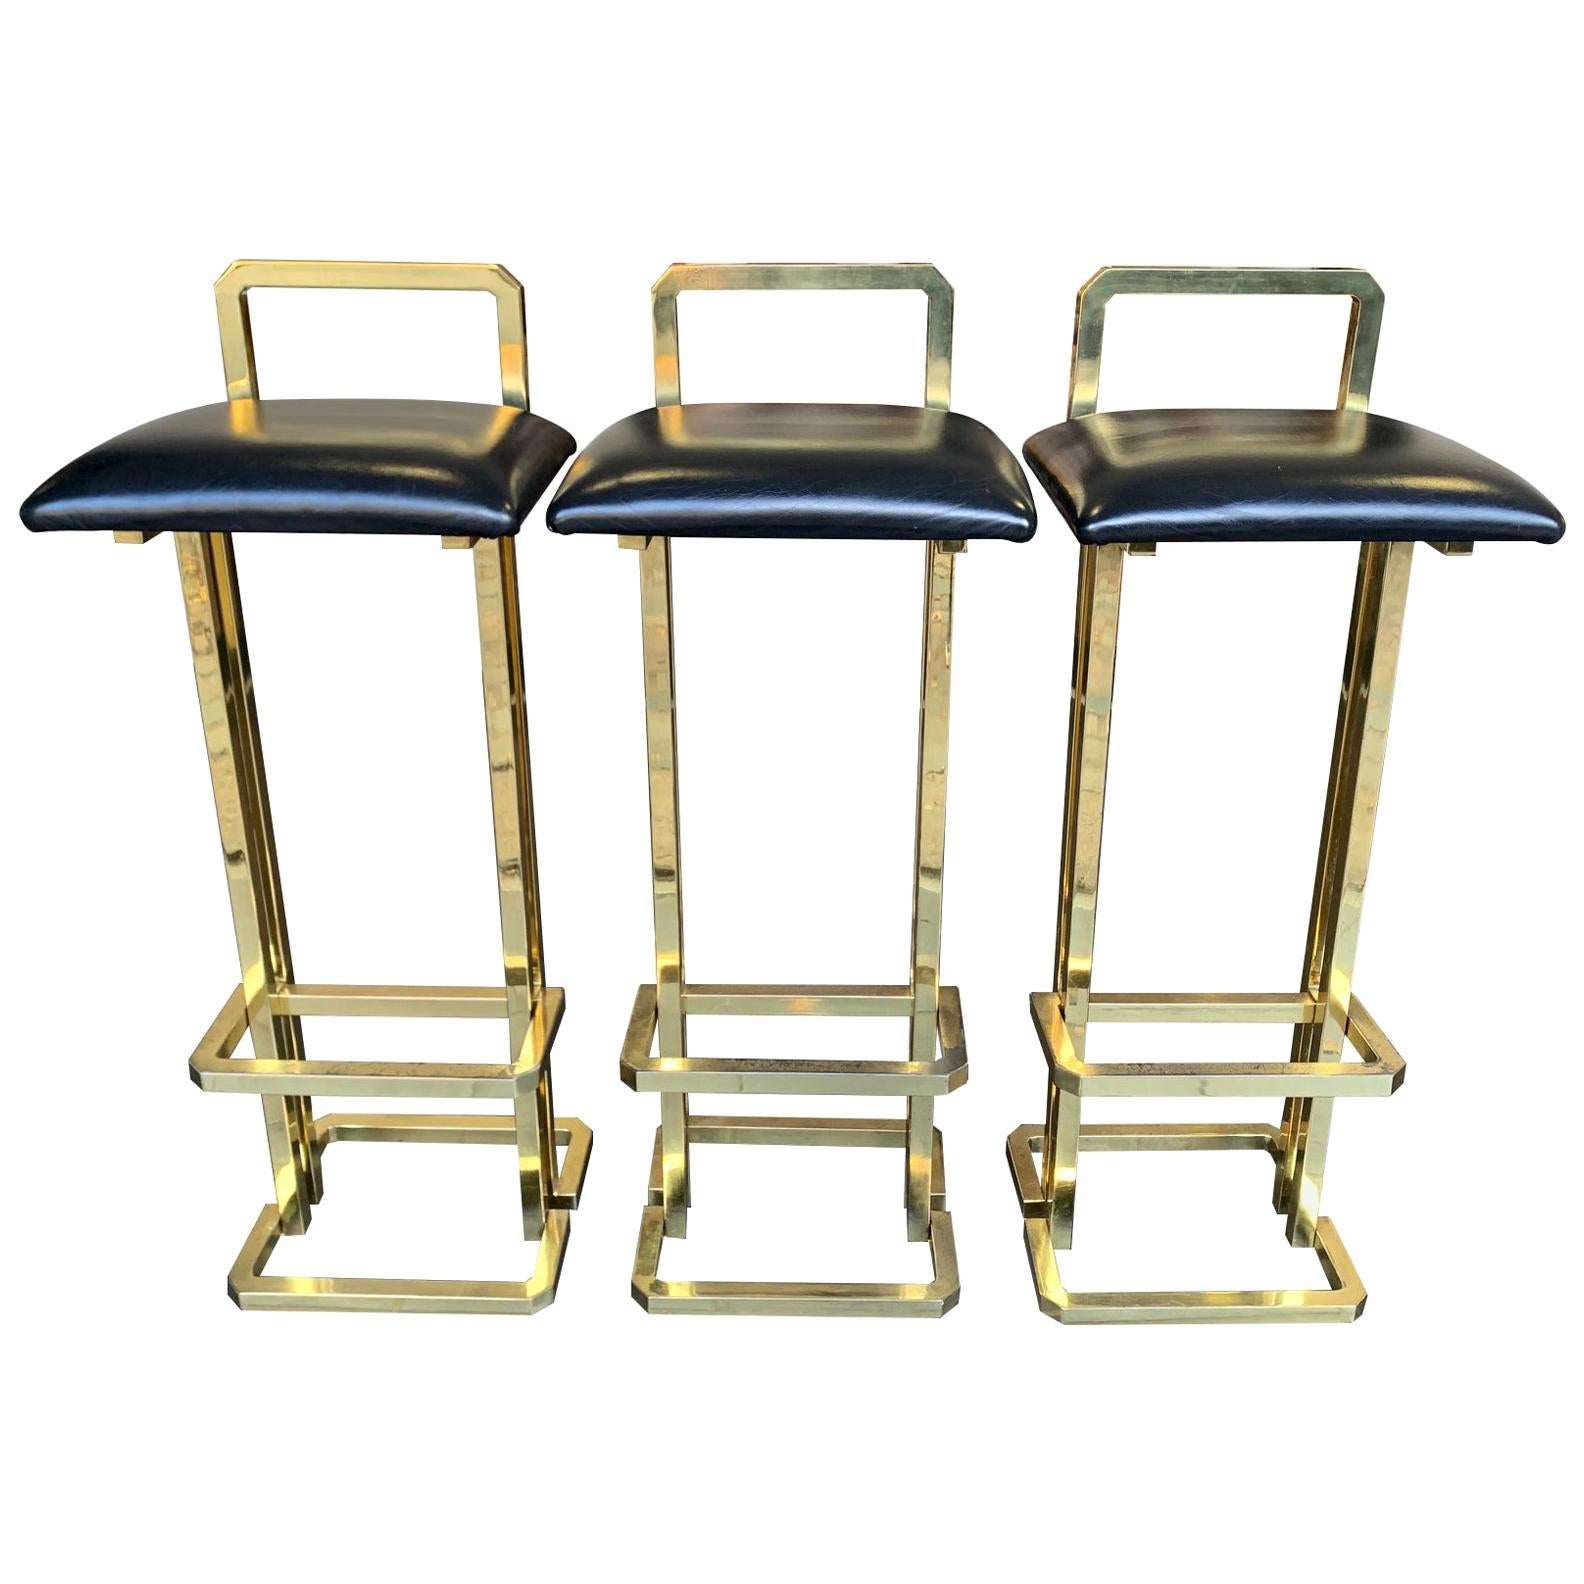 Set of 3 Maison Jansen Style Gilt Metal Stools with Black Leather Seat Pads For Sale